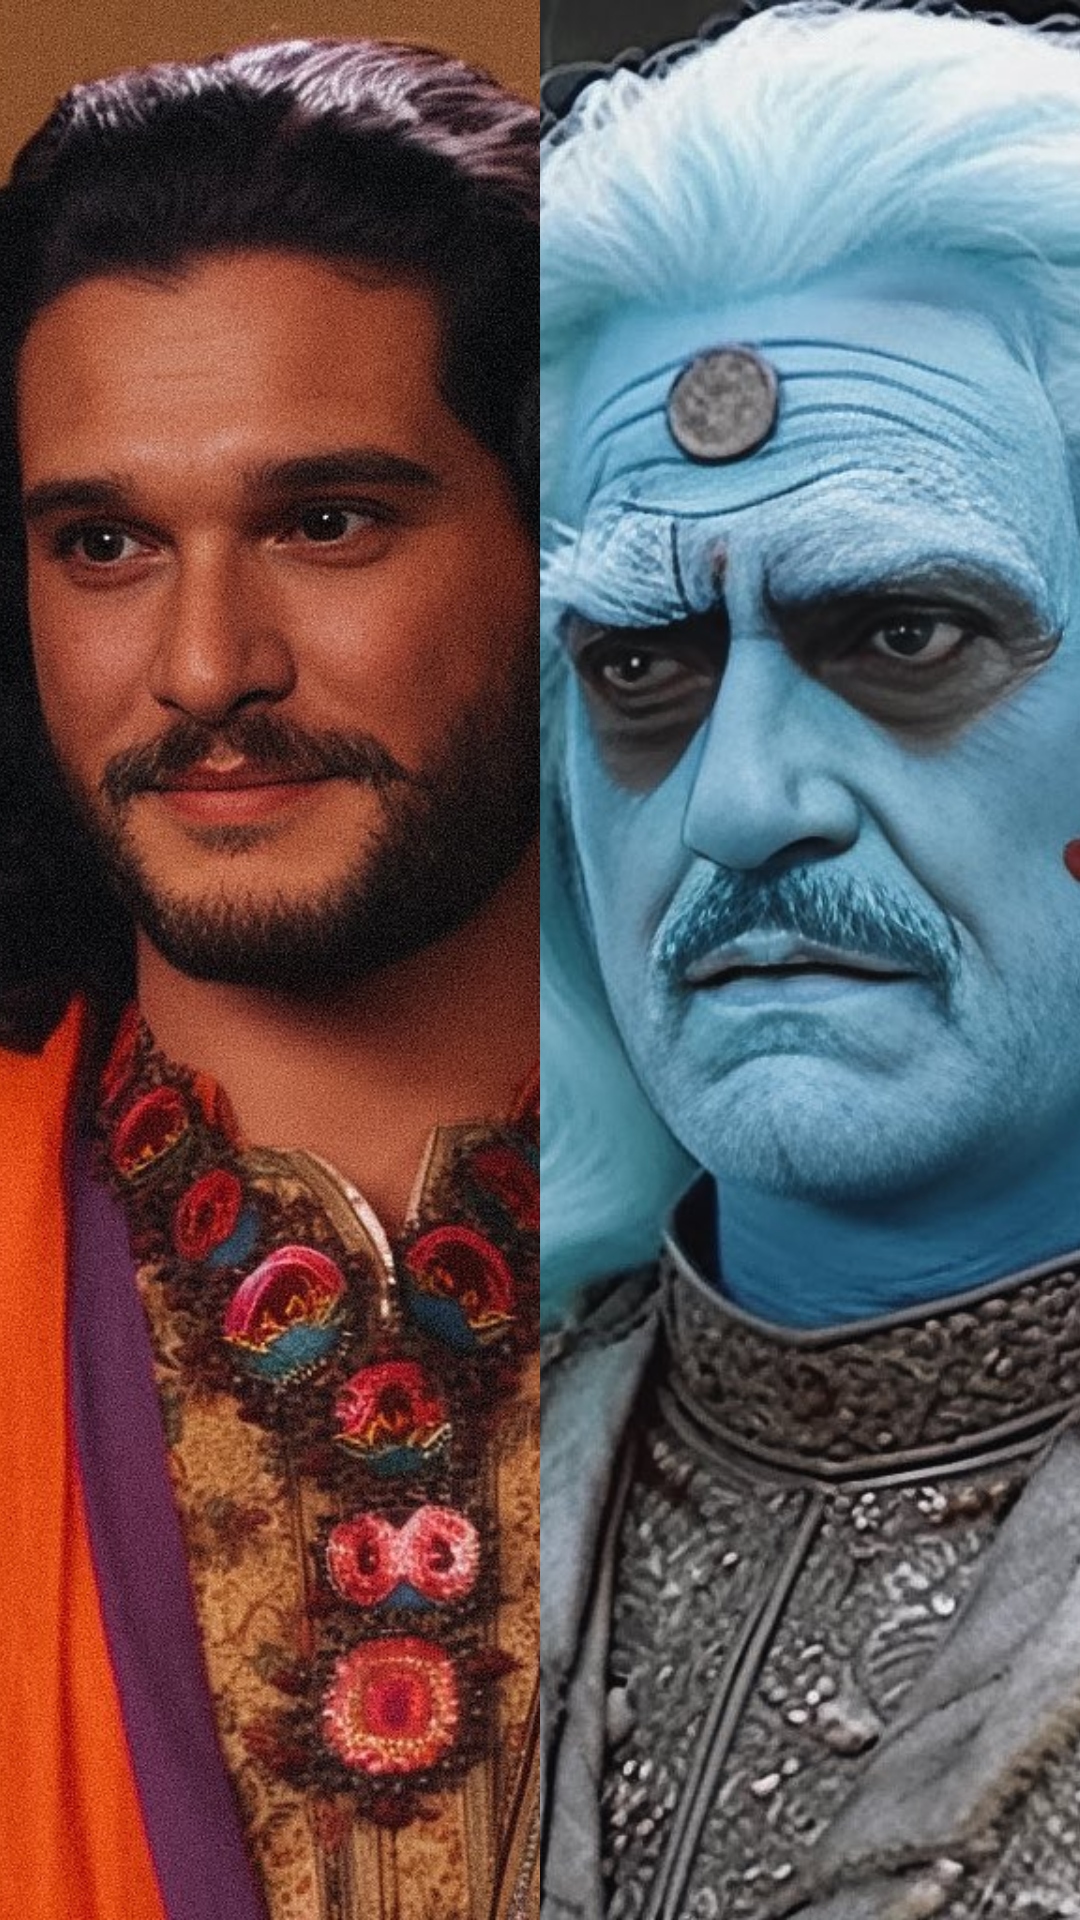 If Game of Thrones was an old Hindi TV serial, AI shows how characters would look 